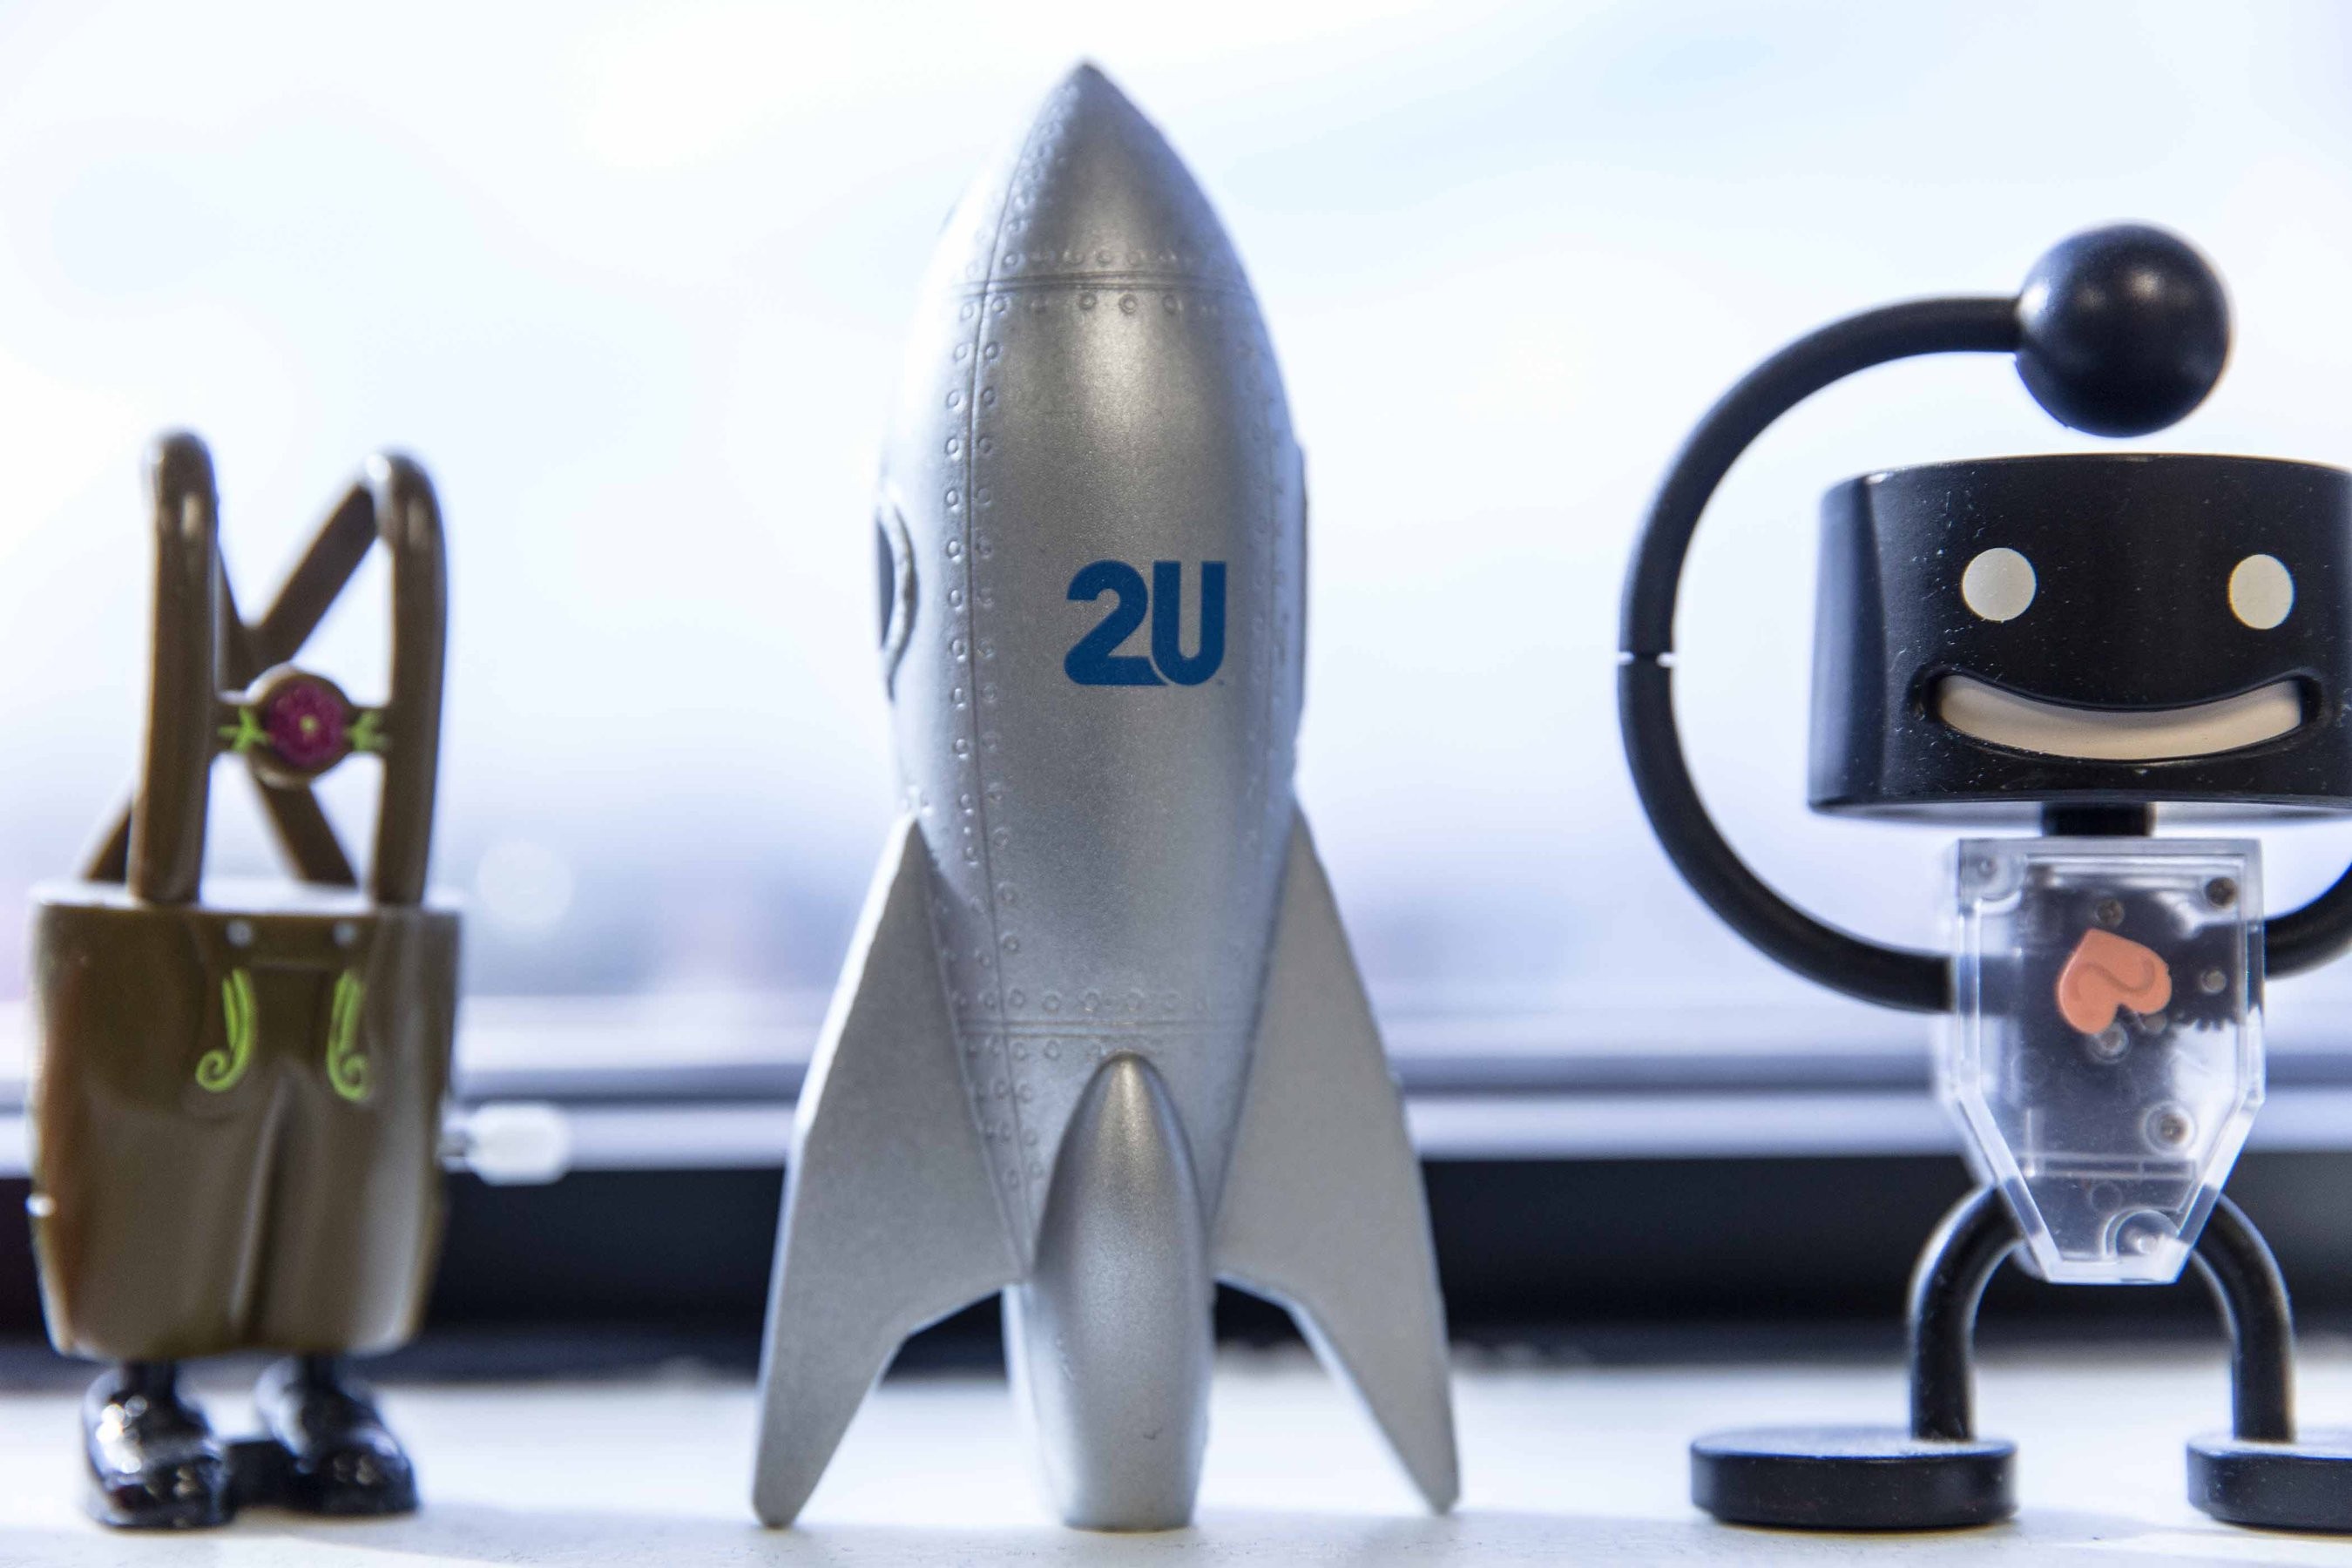 A silver rocket with the 2U logo on it sits in between a smiling robot toy and an overalls with feet toy